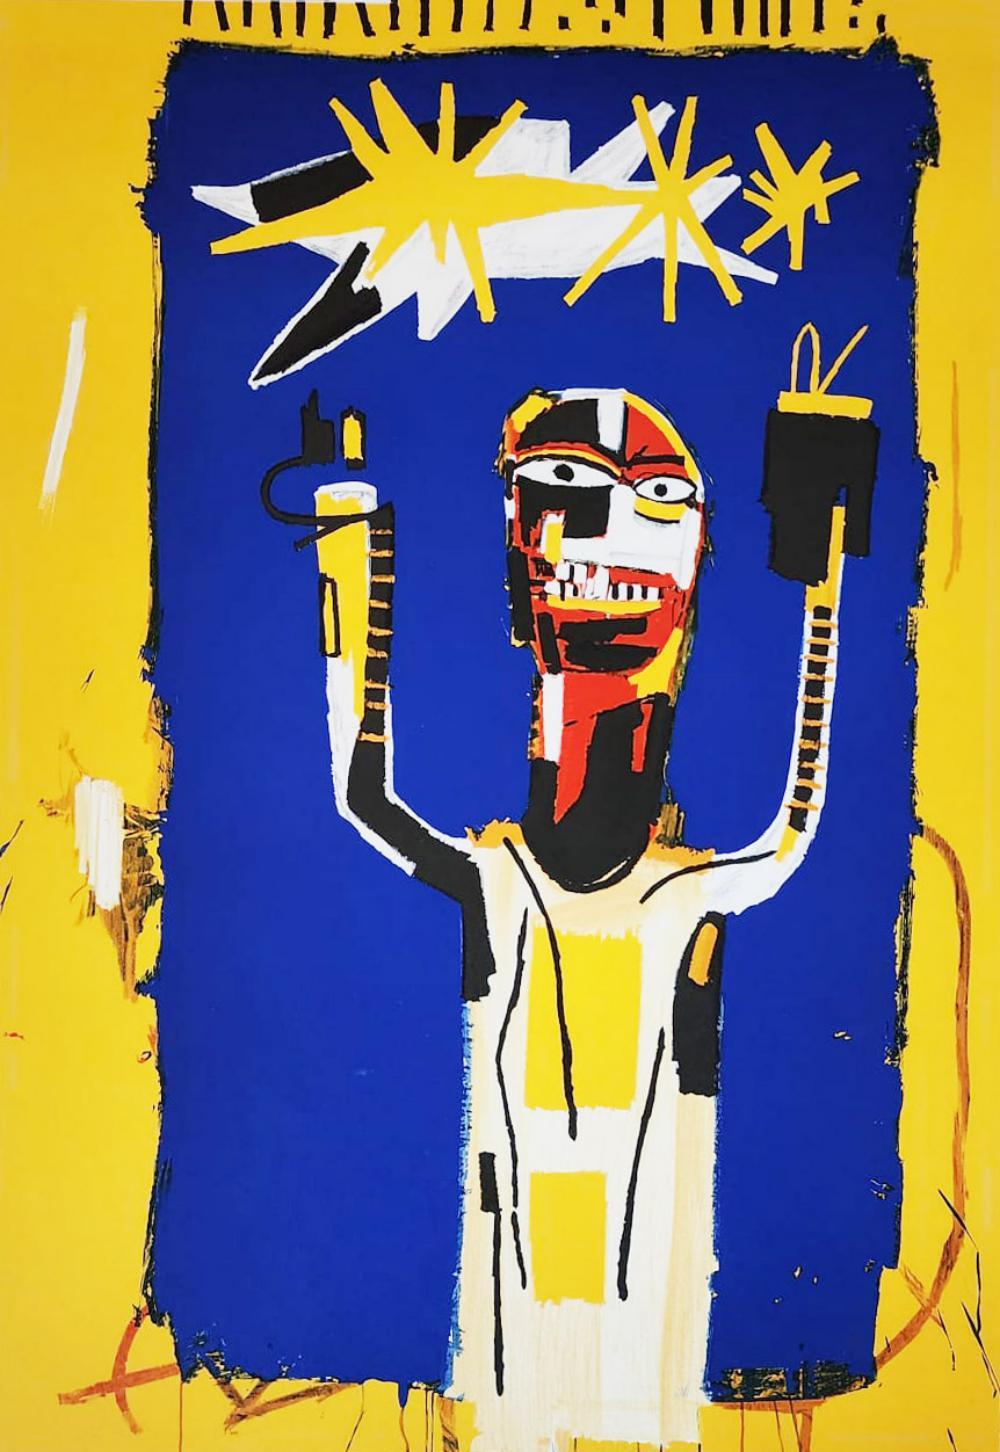 JEAN MICHEL BASQUIAT, 'WELCOMING JEERS 1997' VERY RARE LIMITED EDITION ESTATE LI - Print by after Jean-Michel Basquiat